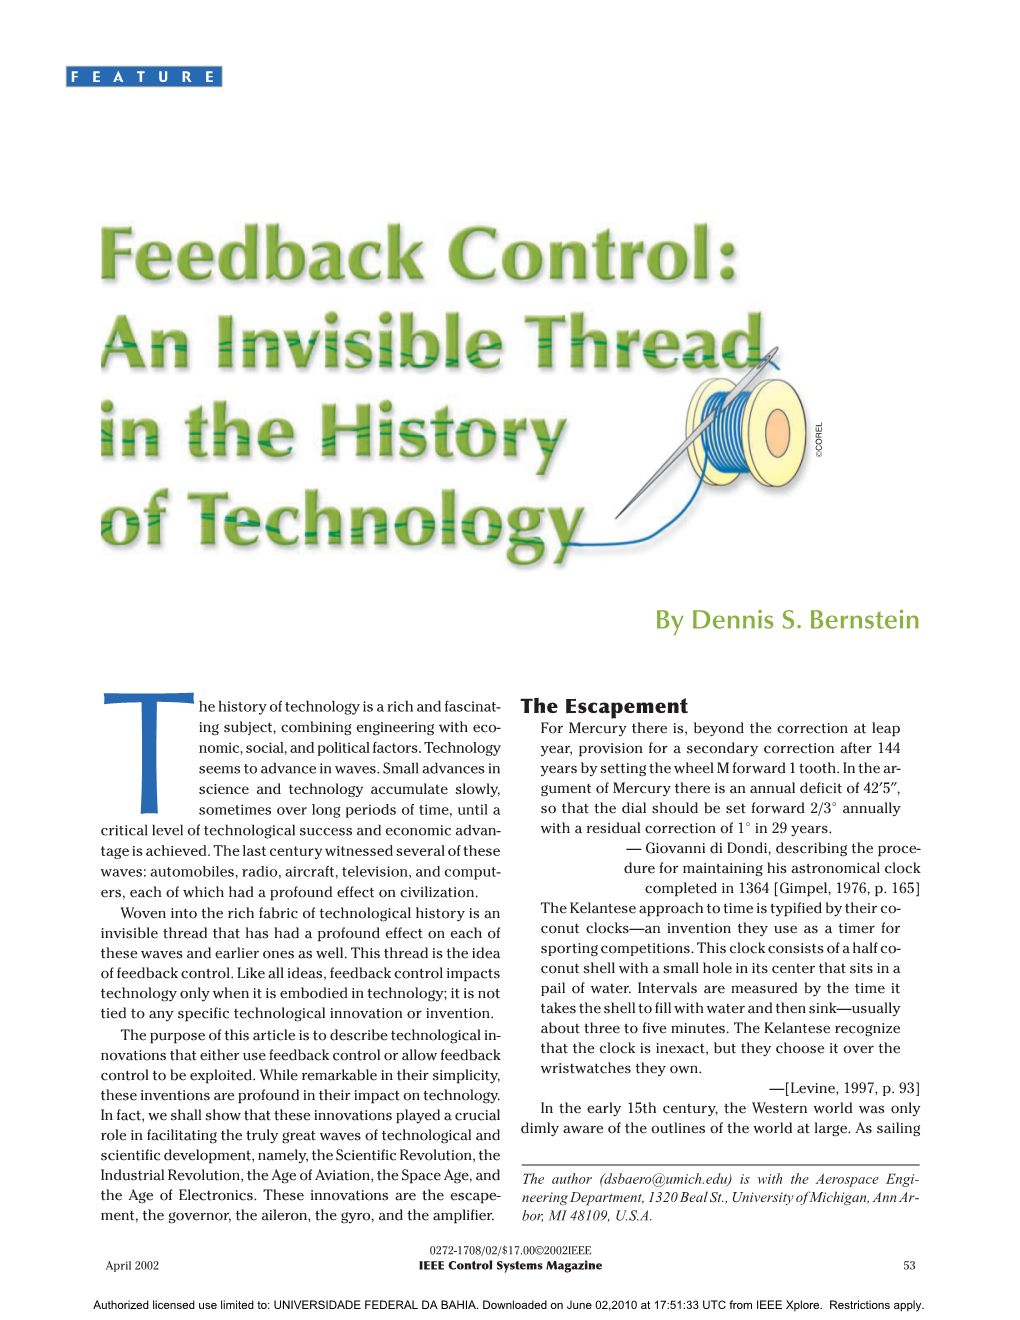 Feedback Control: an Invisible Thread in the History of Technology